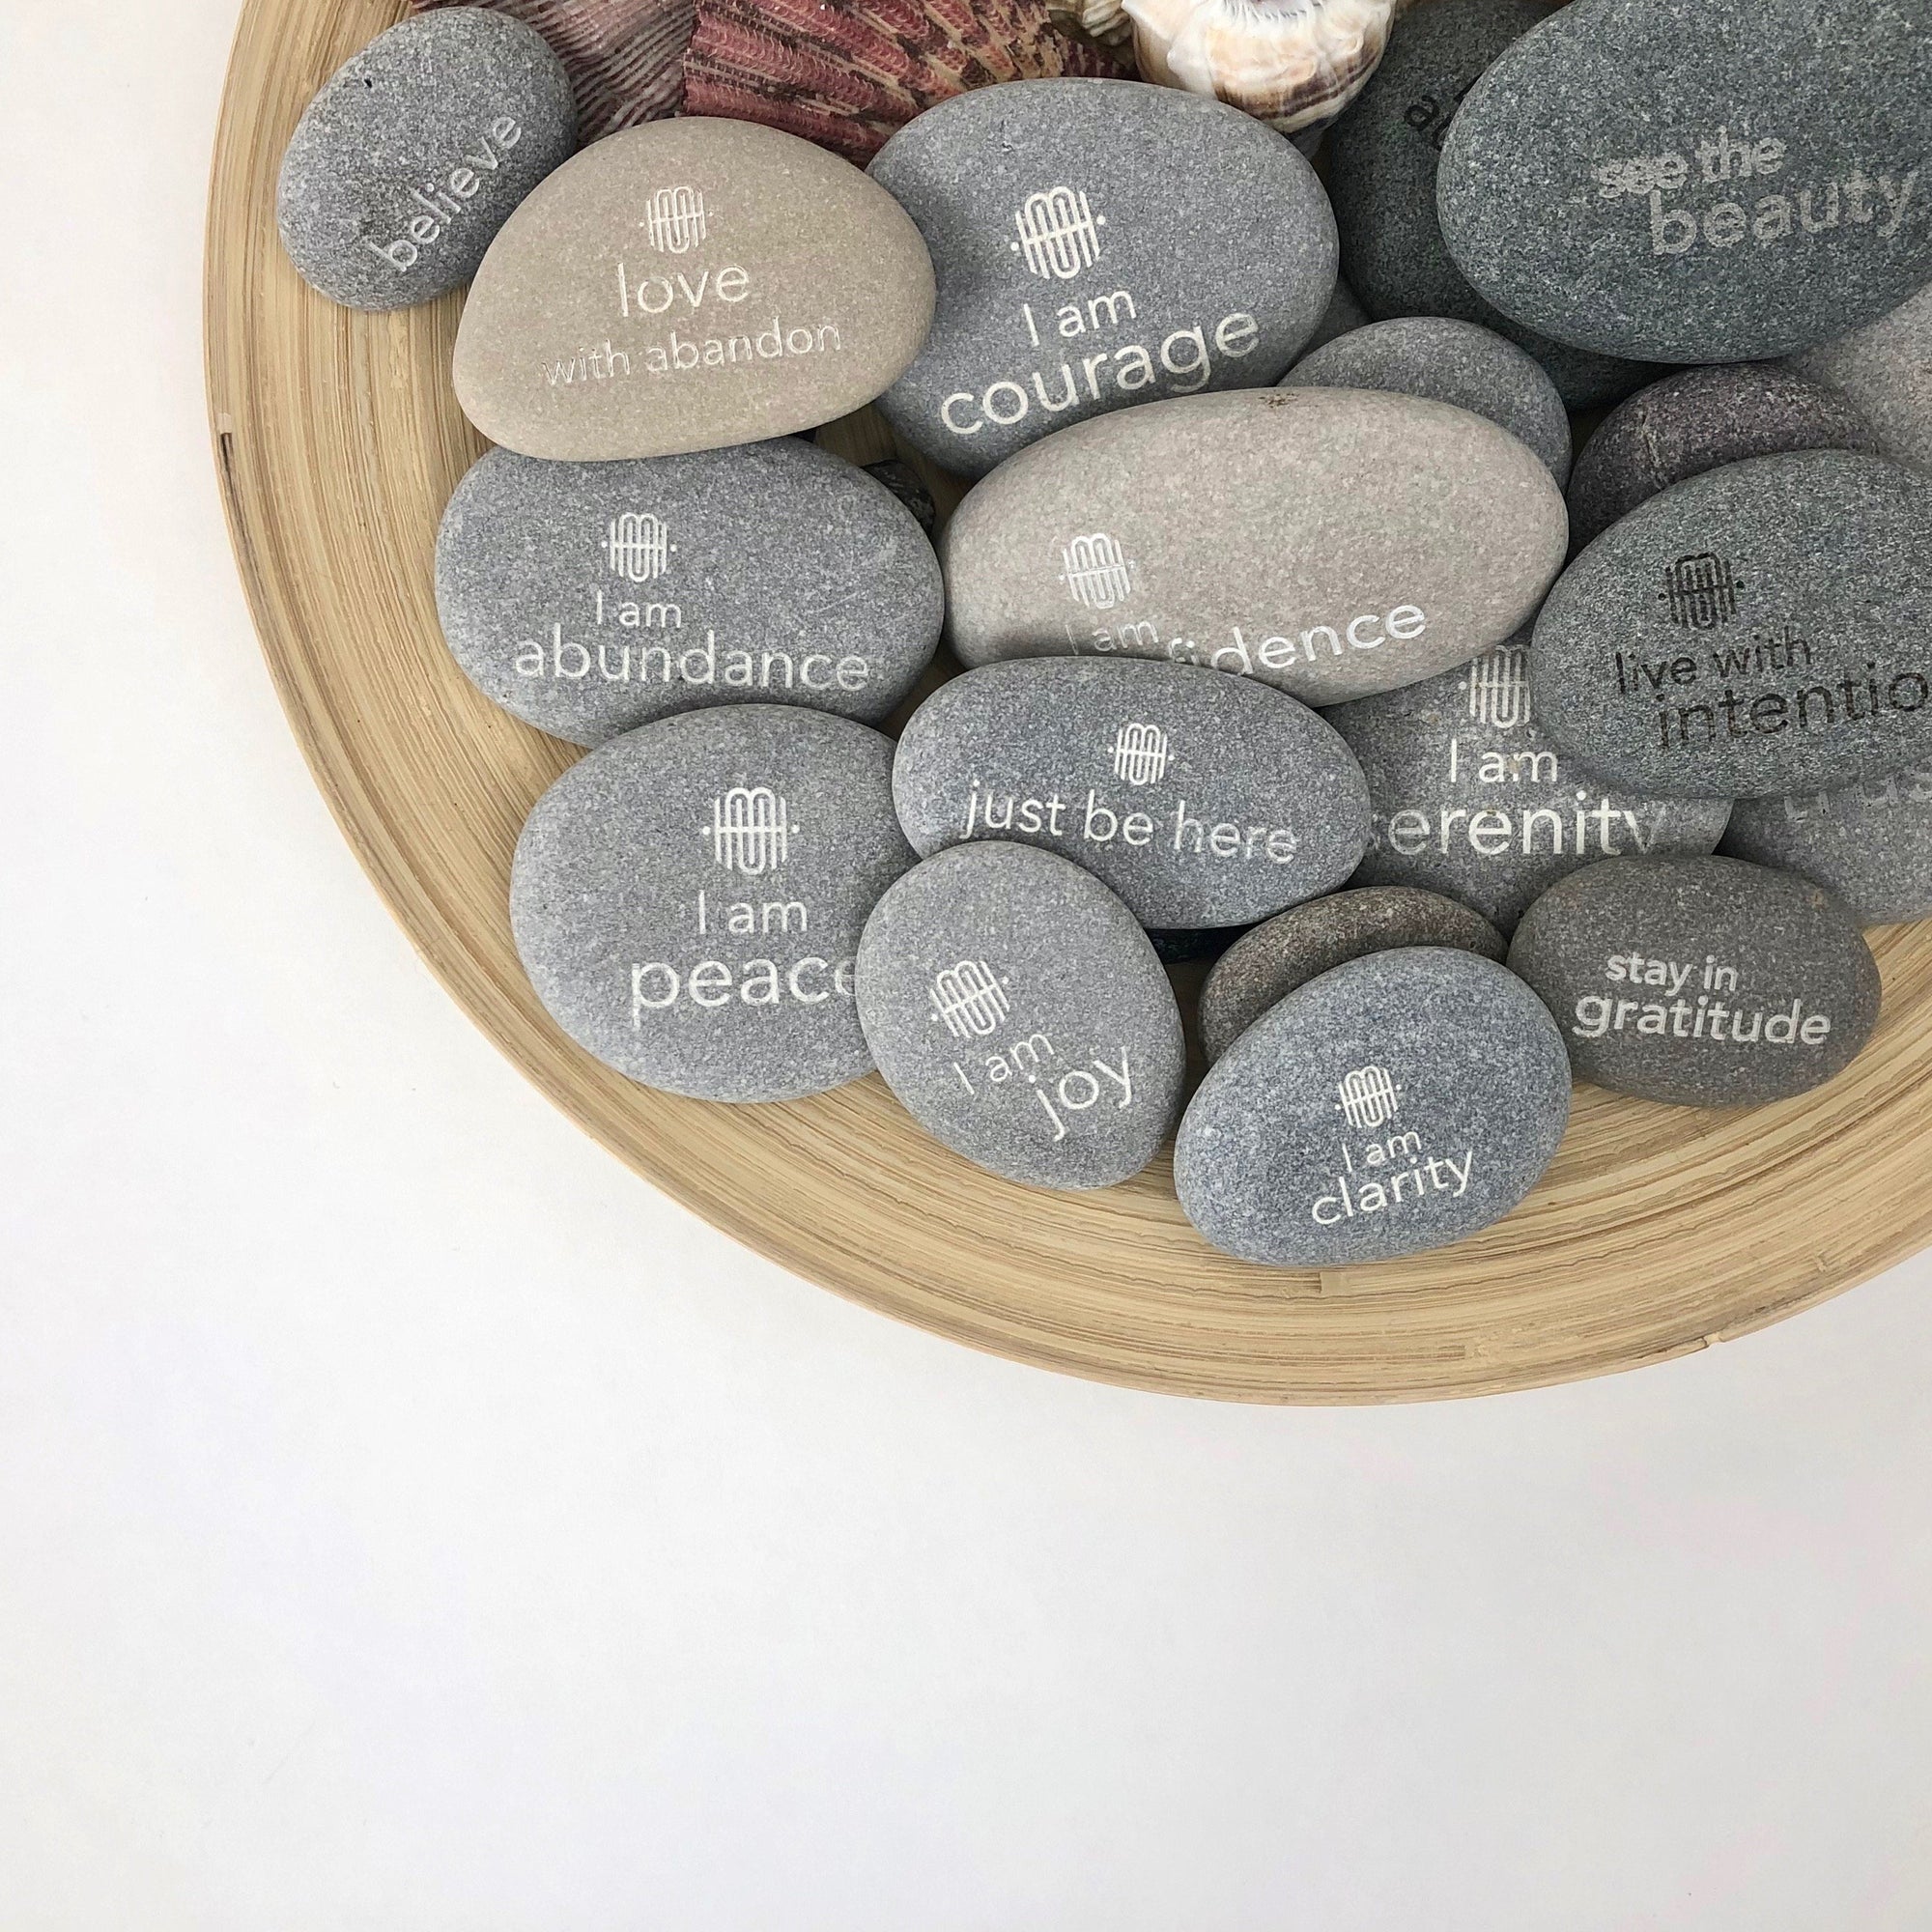 Mindful Intention Stones